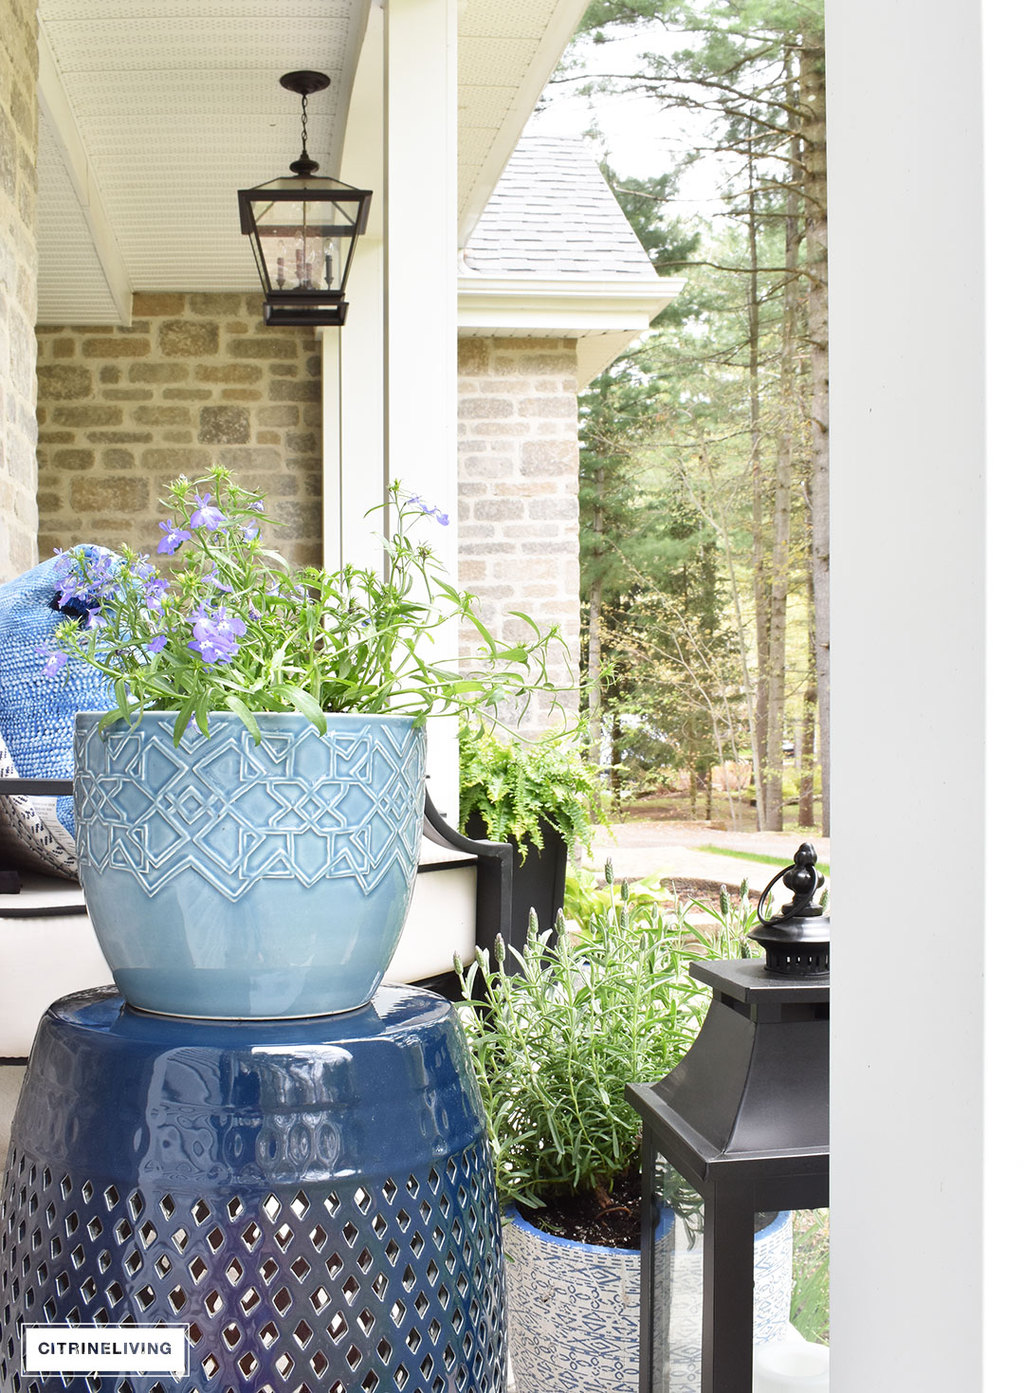 Create a chic Spring porch decorated with blue and white accents: garden stools, potted plants with some boho-chic and nautical pieces thrown into the mix!